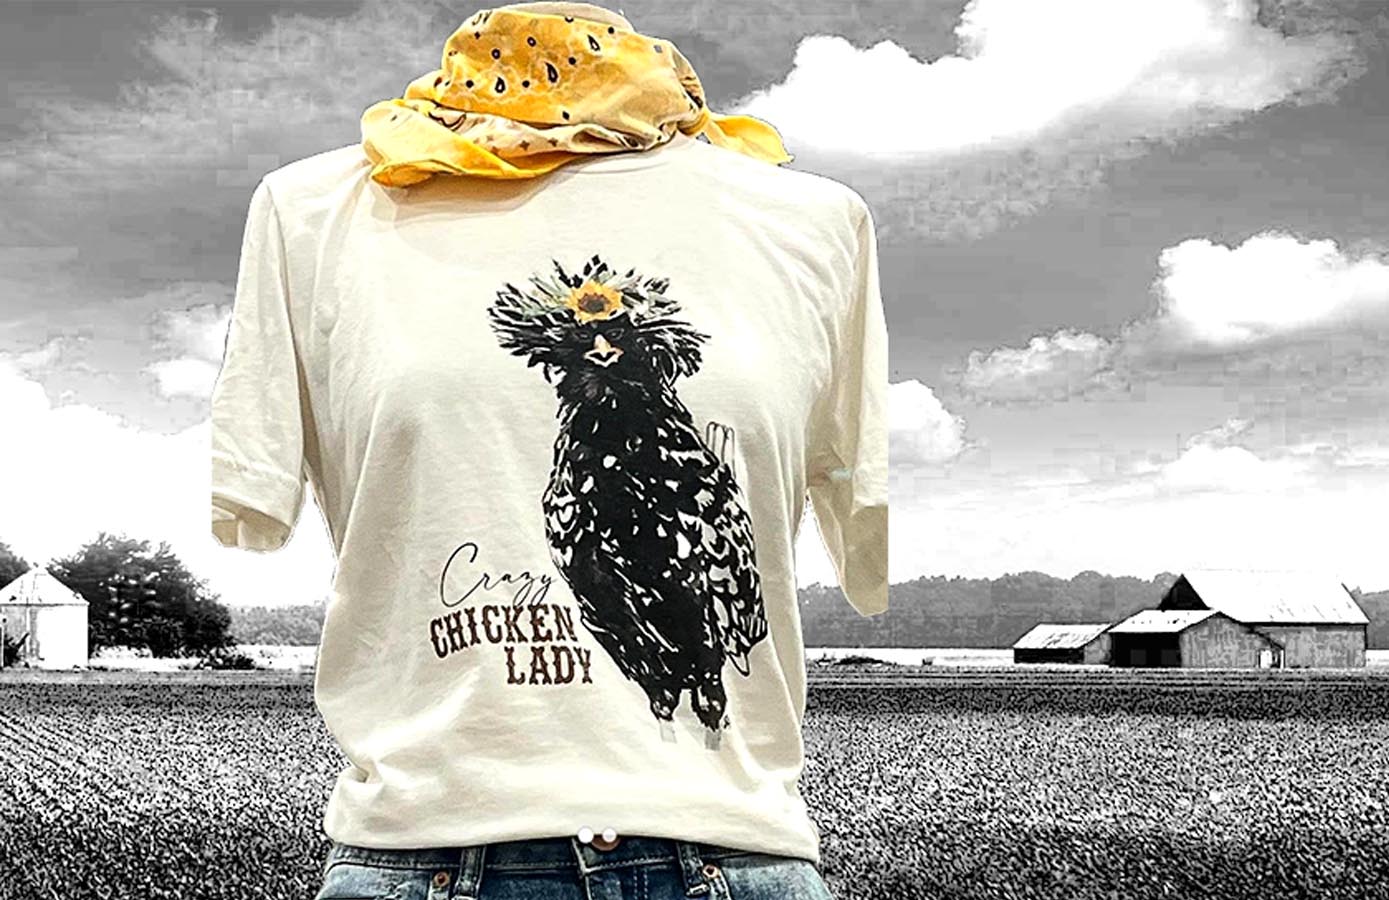 Crazy Chicken Lady - Tees